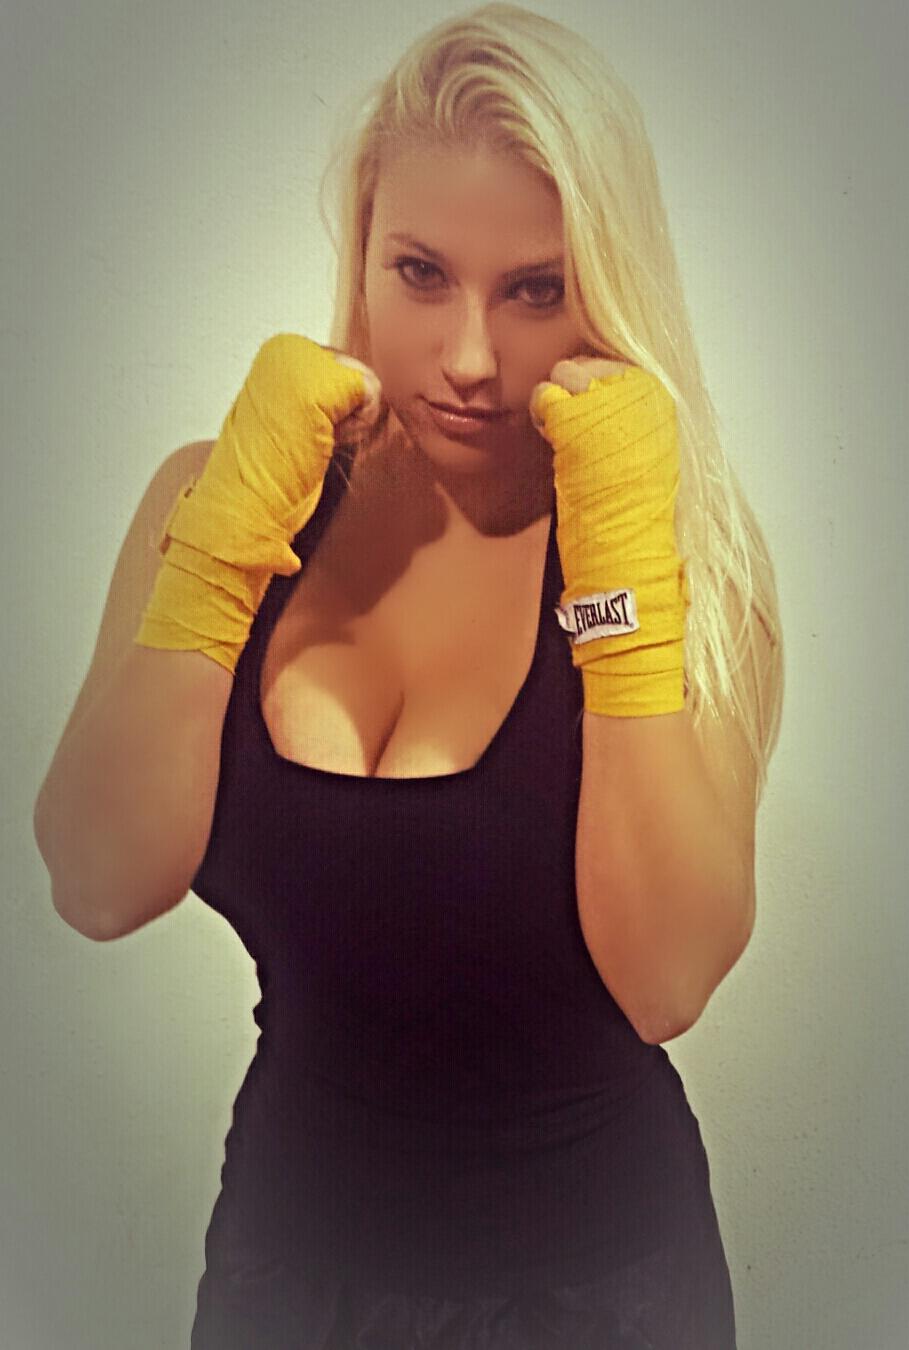 Ding Ding Meet The Hot Mma Fighter Whose Giant Breasts Make Her Fight In A Higher Weight Class